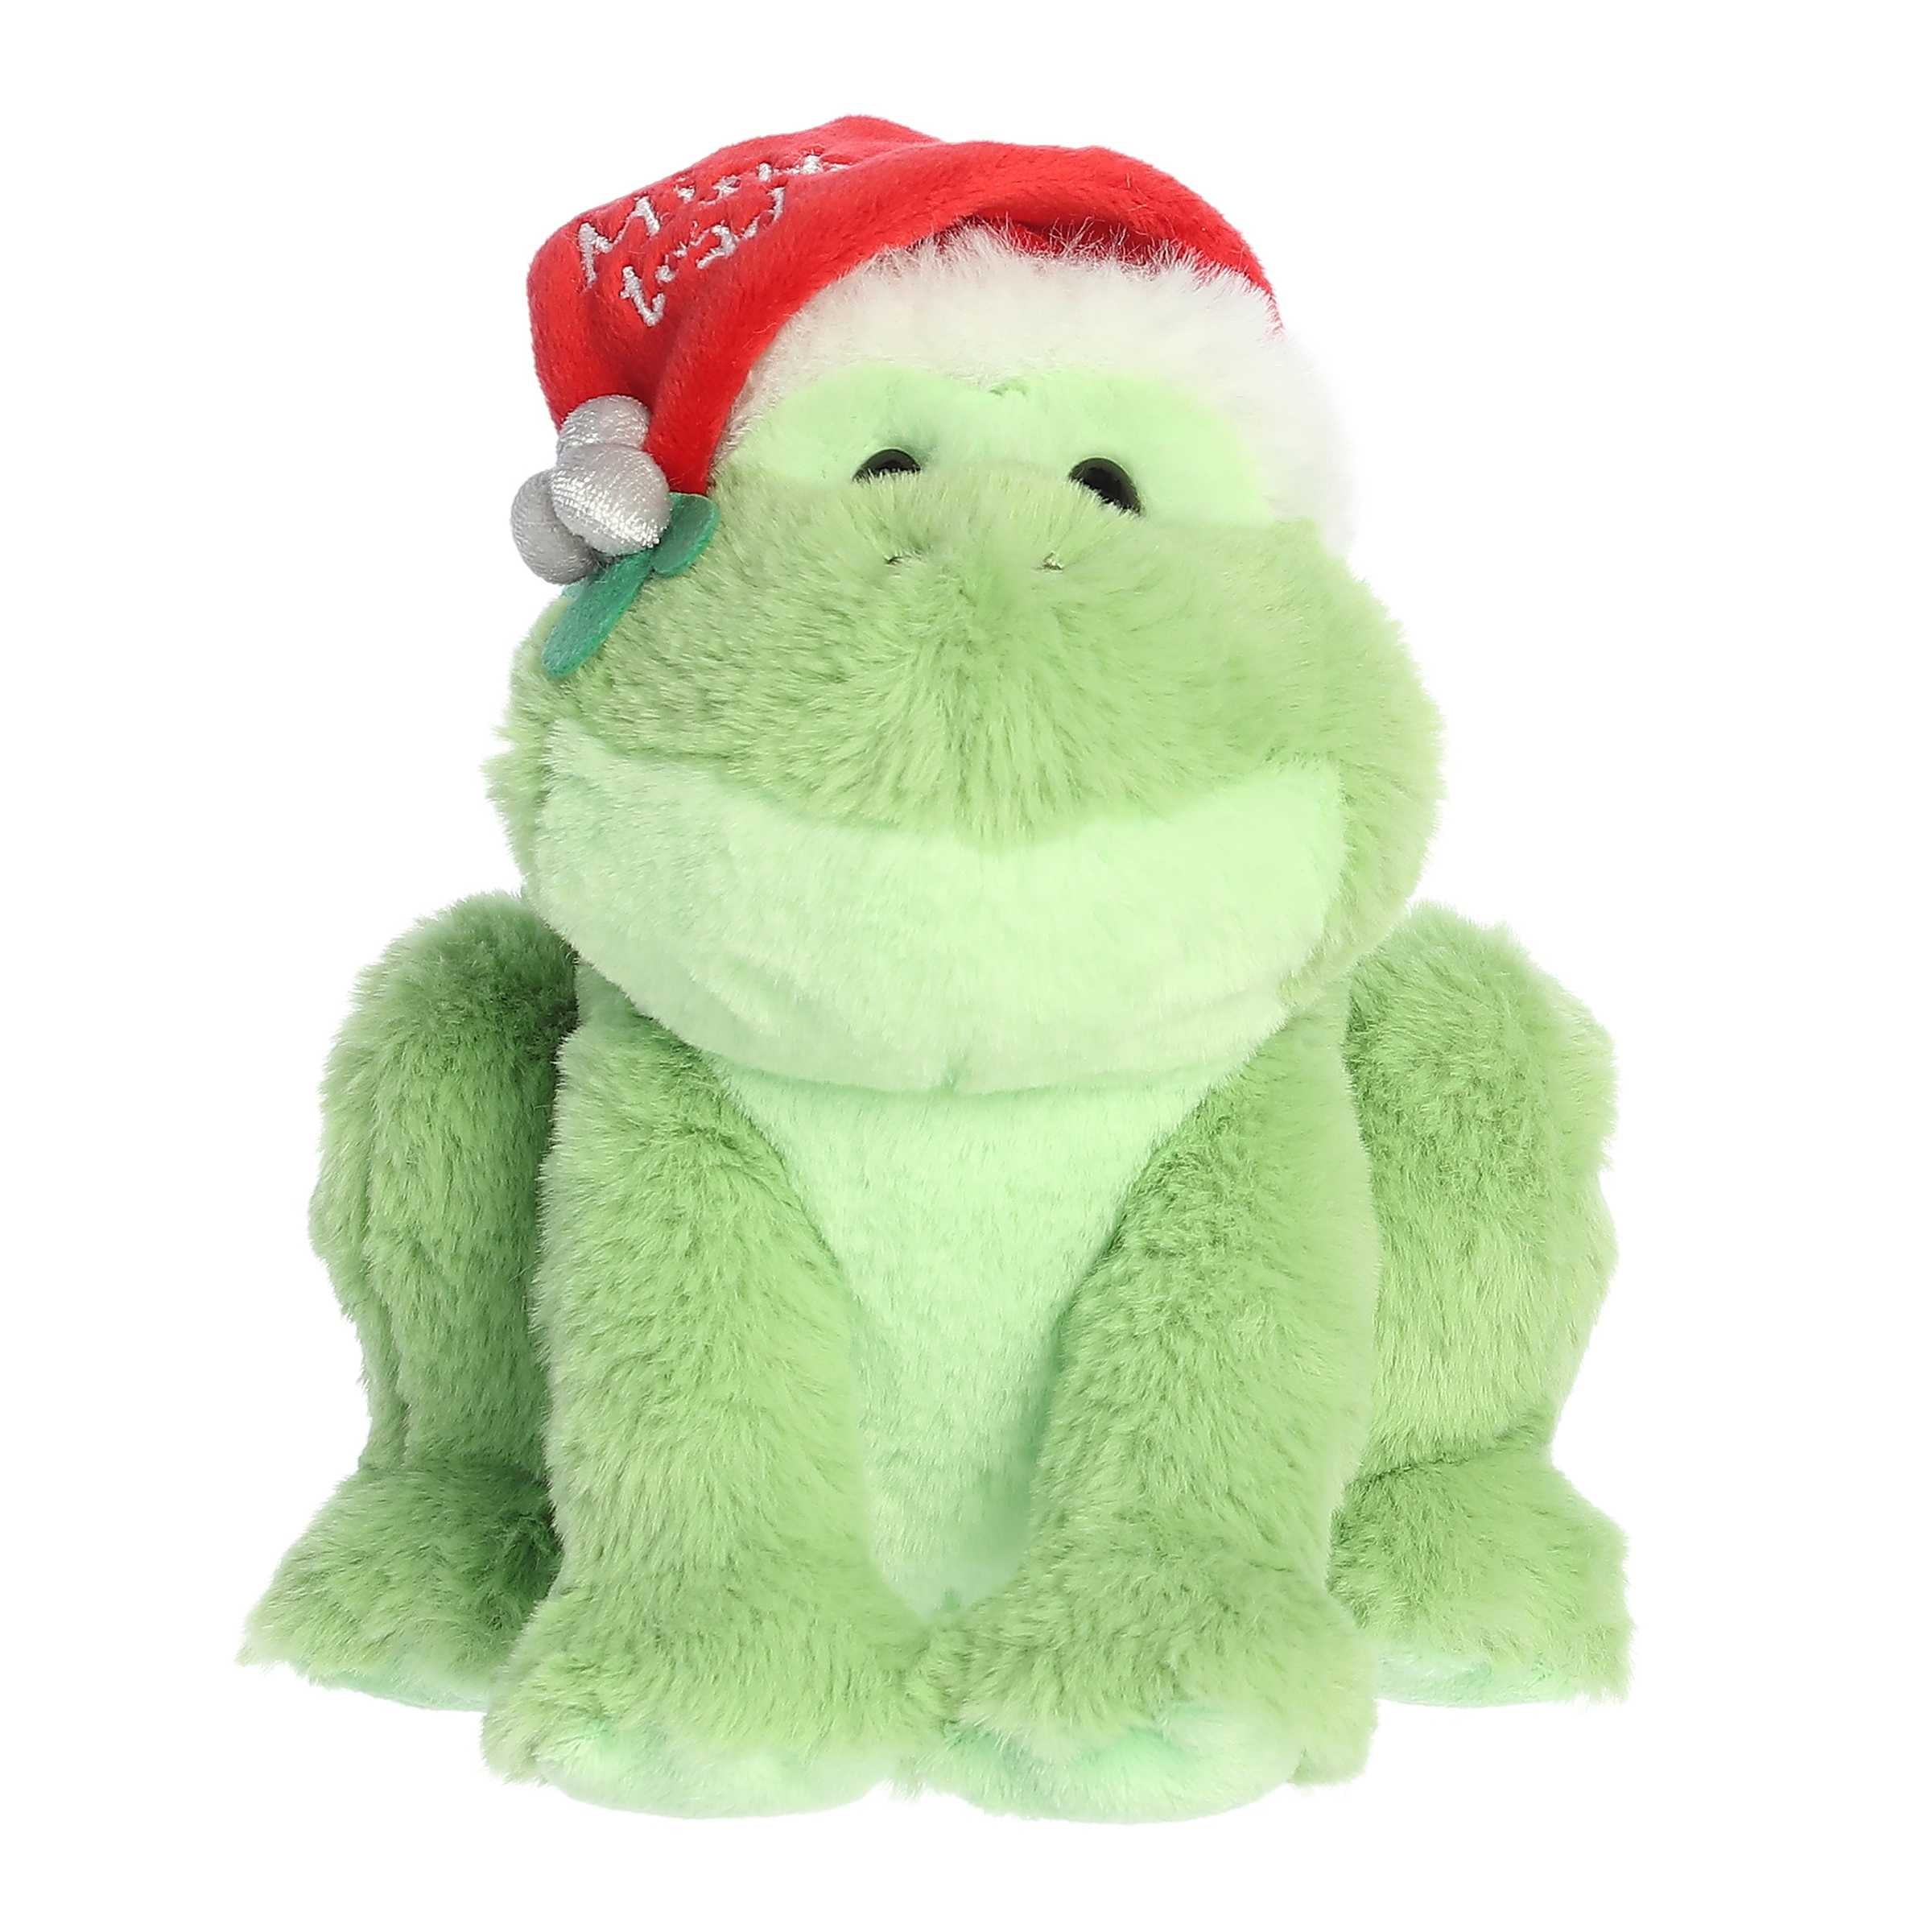 Happy light green toad stuffed animal wearing a non-detachable red Santa hat with "Mistle-toad" embroidered on it